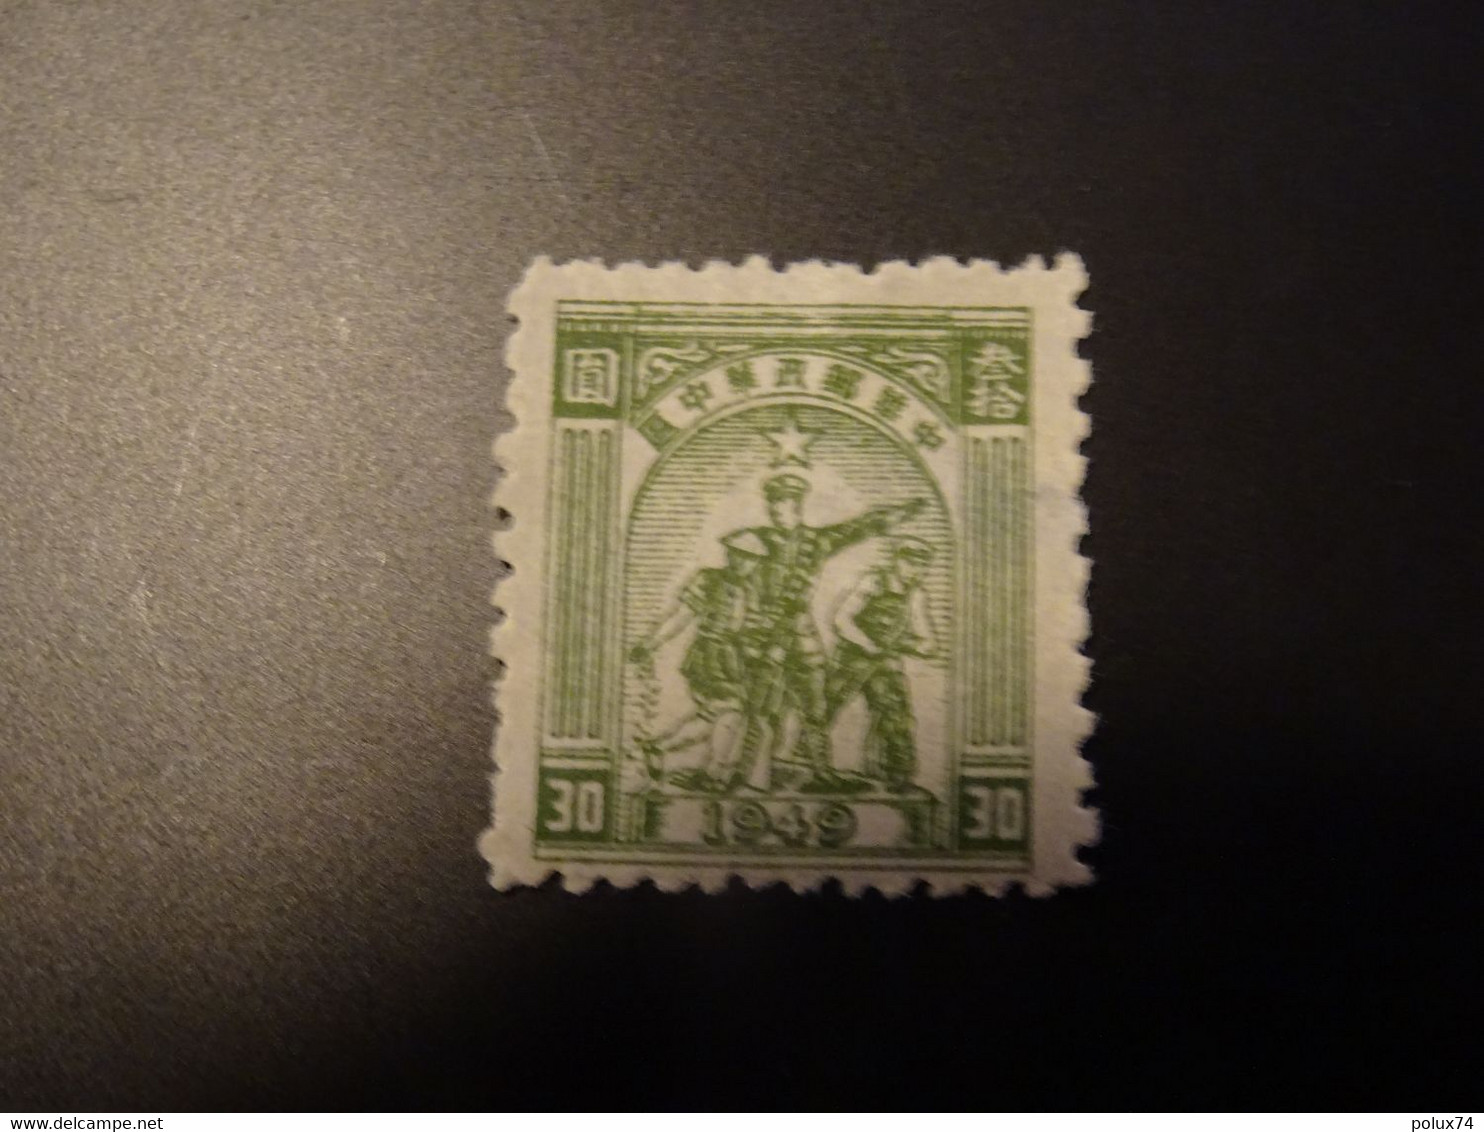 CHINE CENTRALE 1949 SG - China Central 1948-49